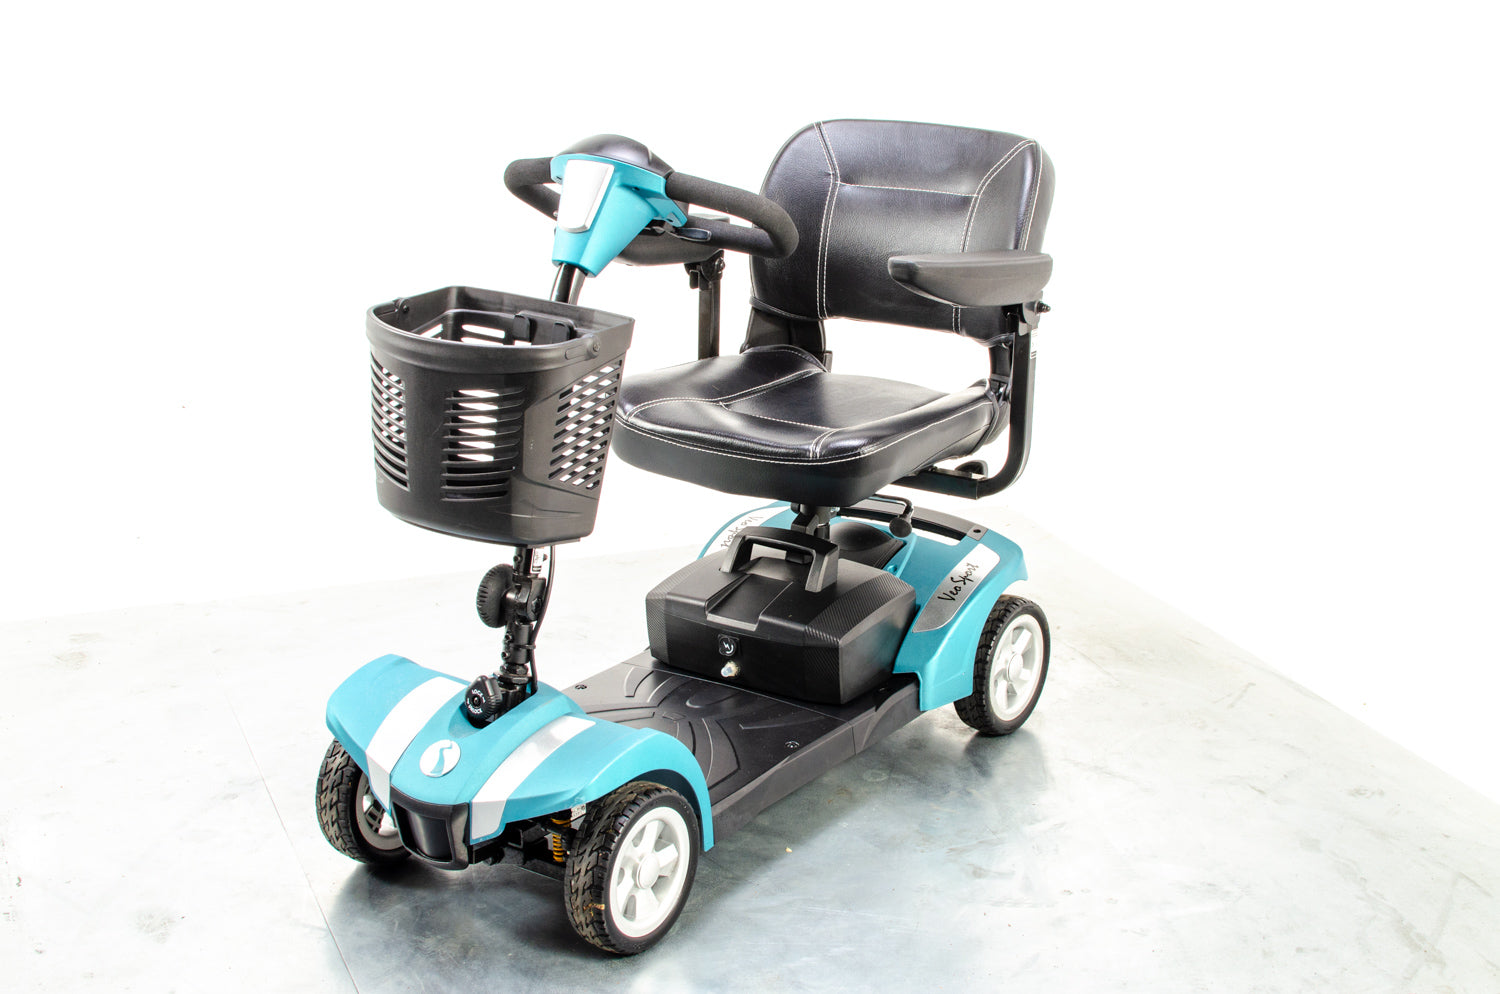 2019 Rascal Veo Sport Used Electric Mobility Scooter 4mph Transportable Teal